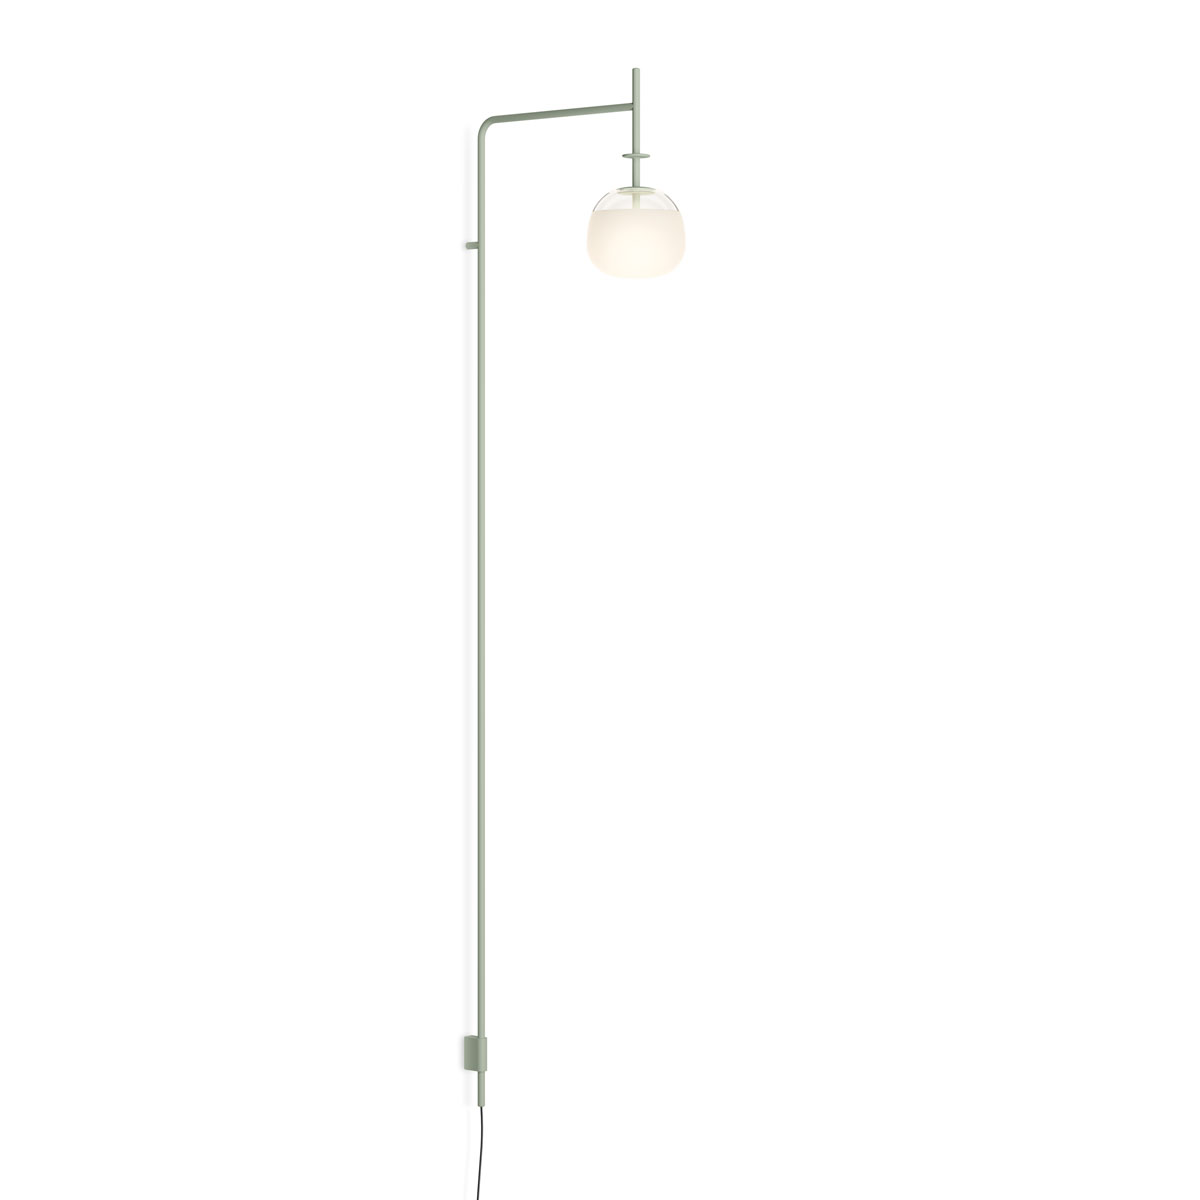 Vibia The Edit - The Versatility of Tempo Wall Lamp